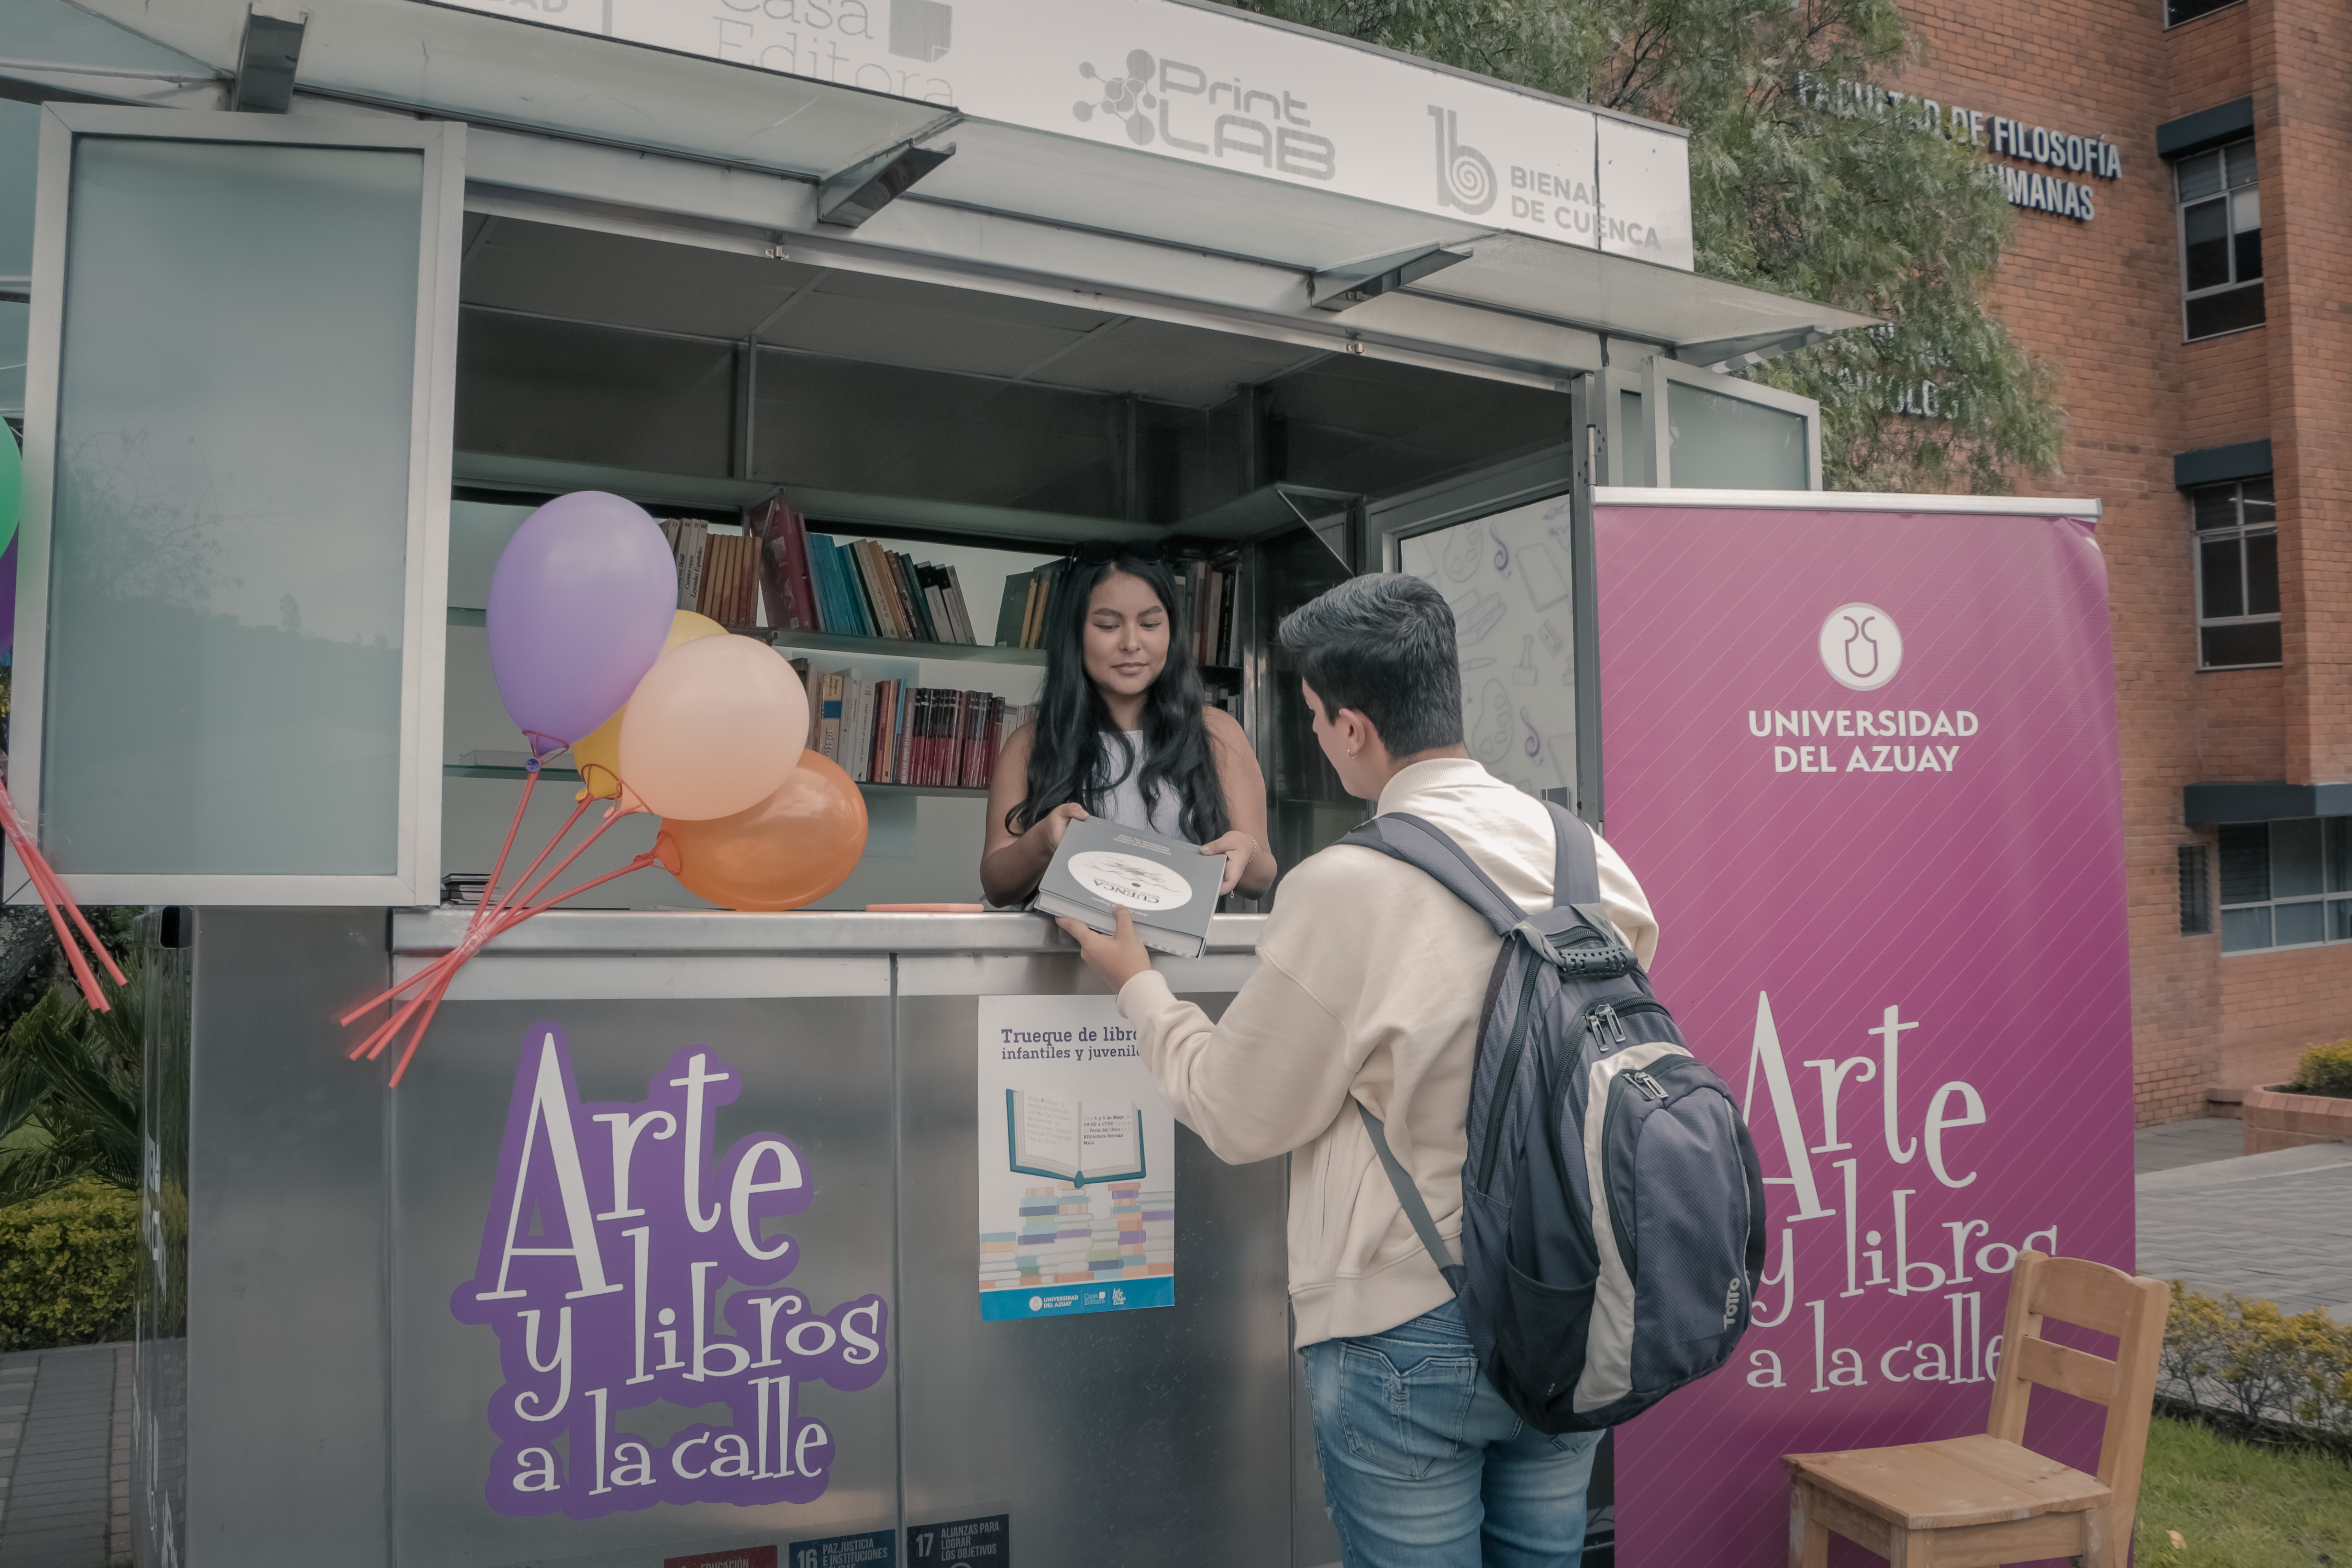 “Art and books on the street”